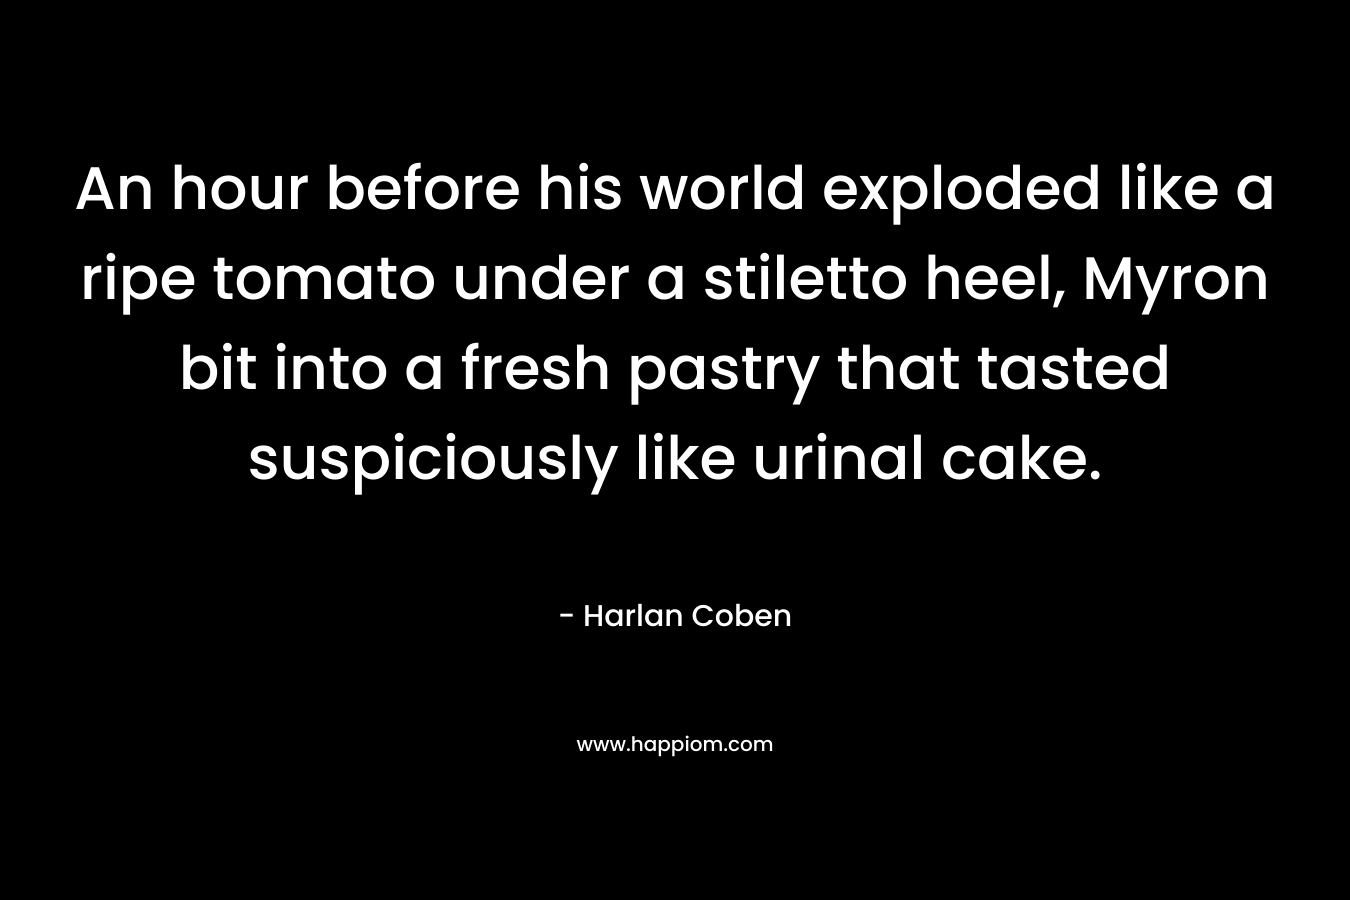 An hour before his world exploded like a ripe tomato under a stiletto heel, Myron bit into a fresh pastry that tasted suspiciously like urinal cake.